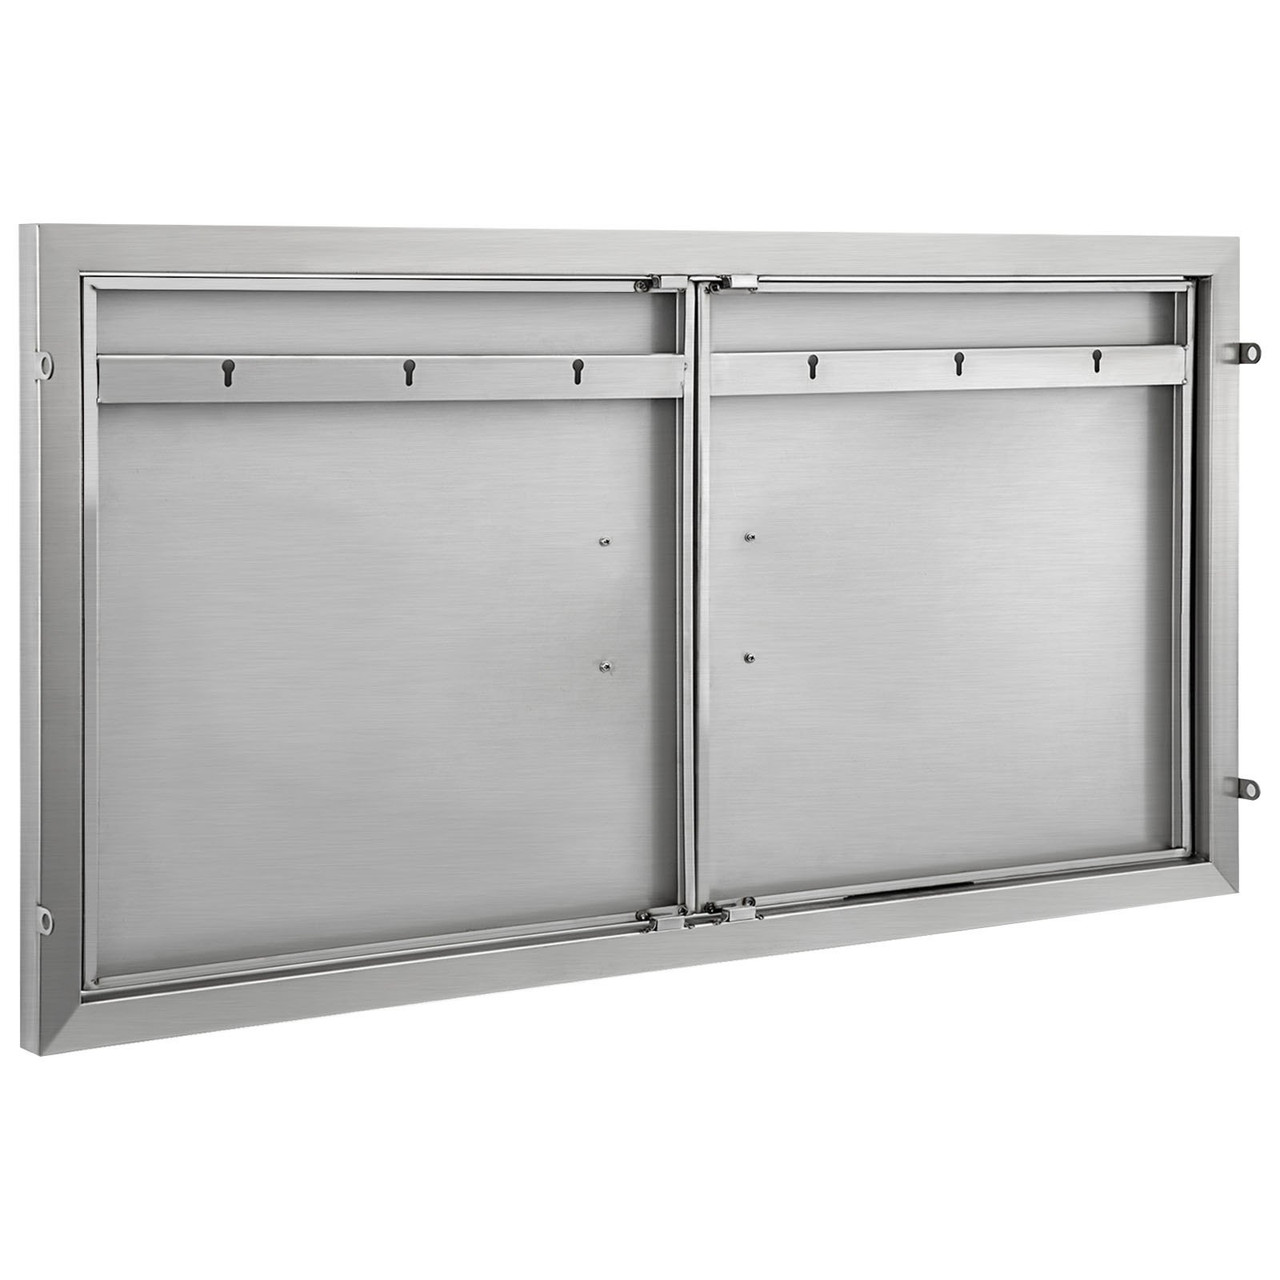 BBQ Access Door 42W X 21H Inch, Double BBQ Door Stainless Steel, Outdoor Kitchen Doors for Commercial BBQ Island, Grilling Station, Outside Cabinet